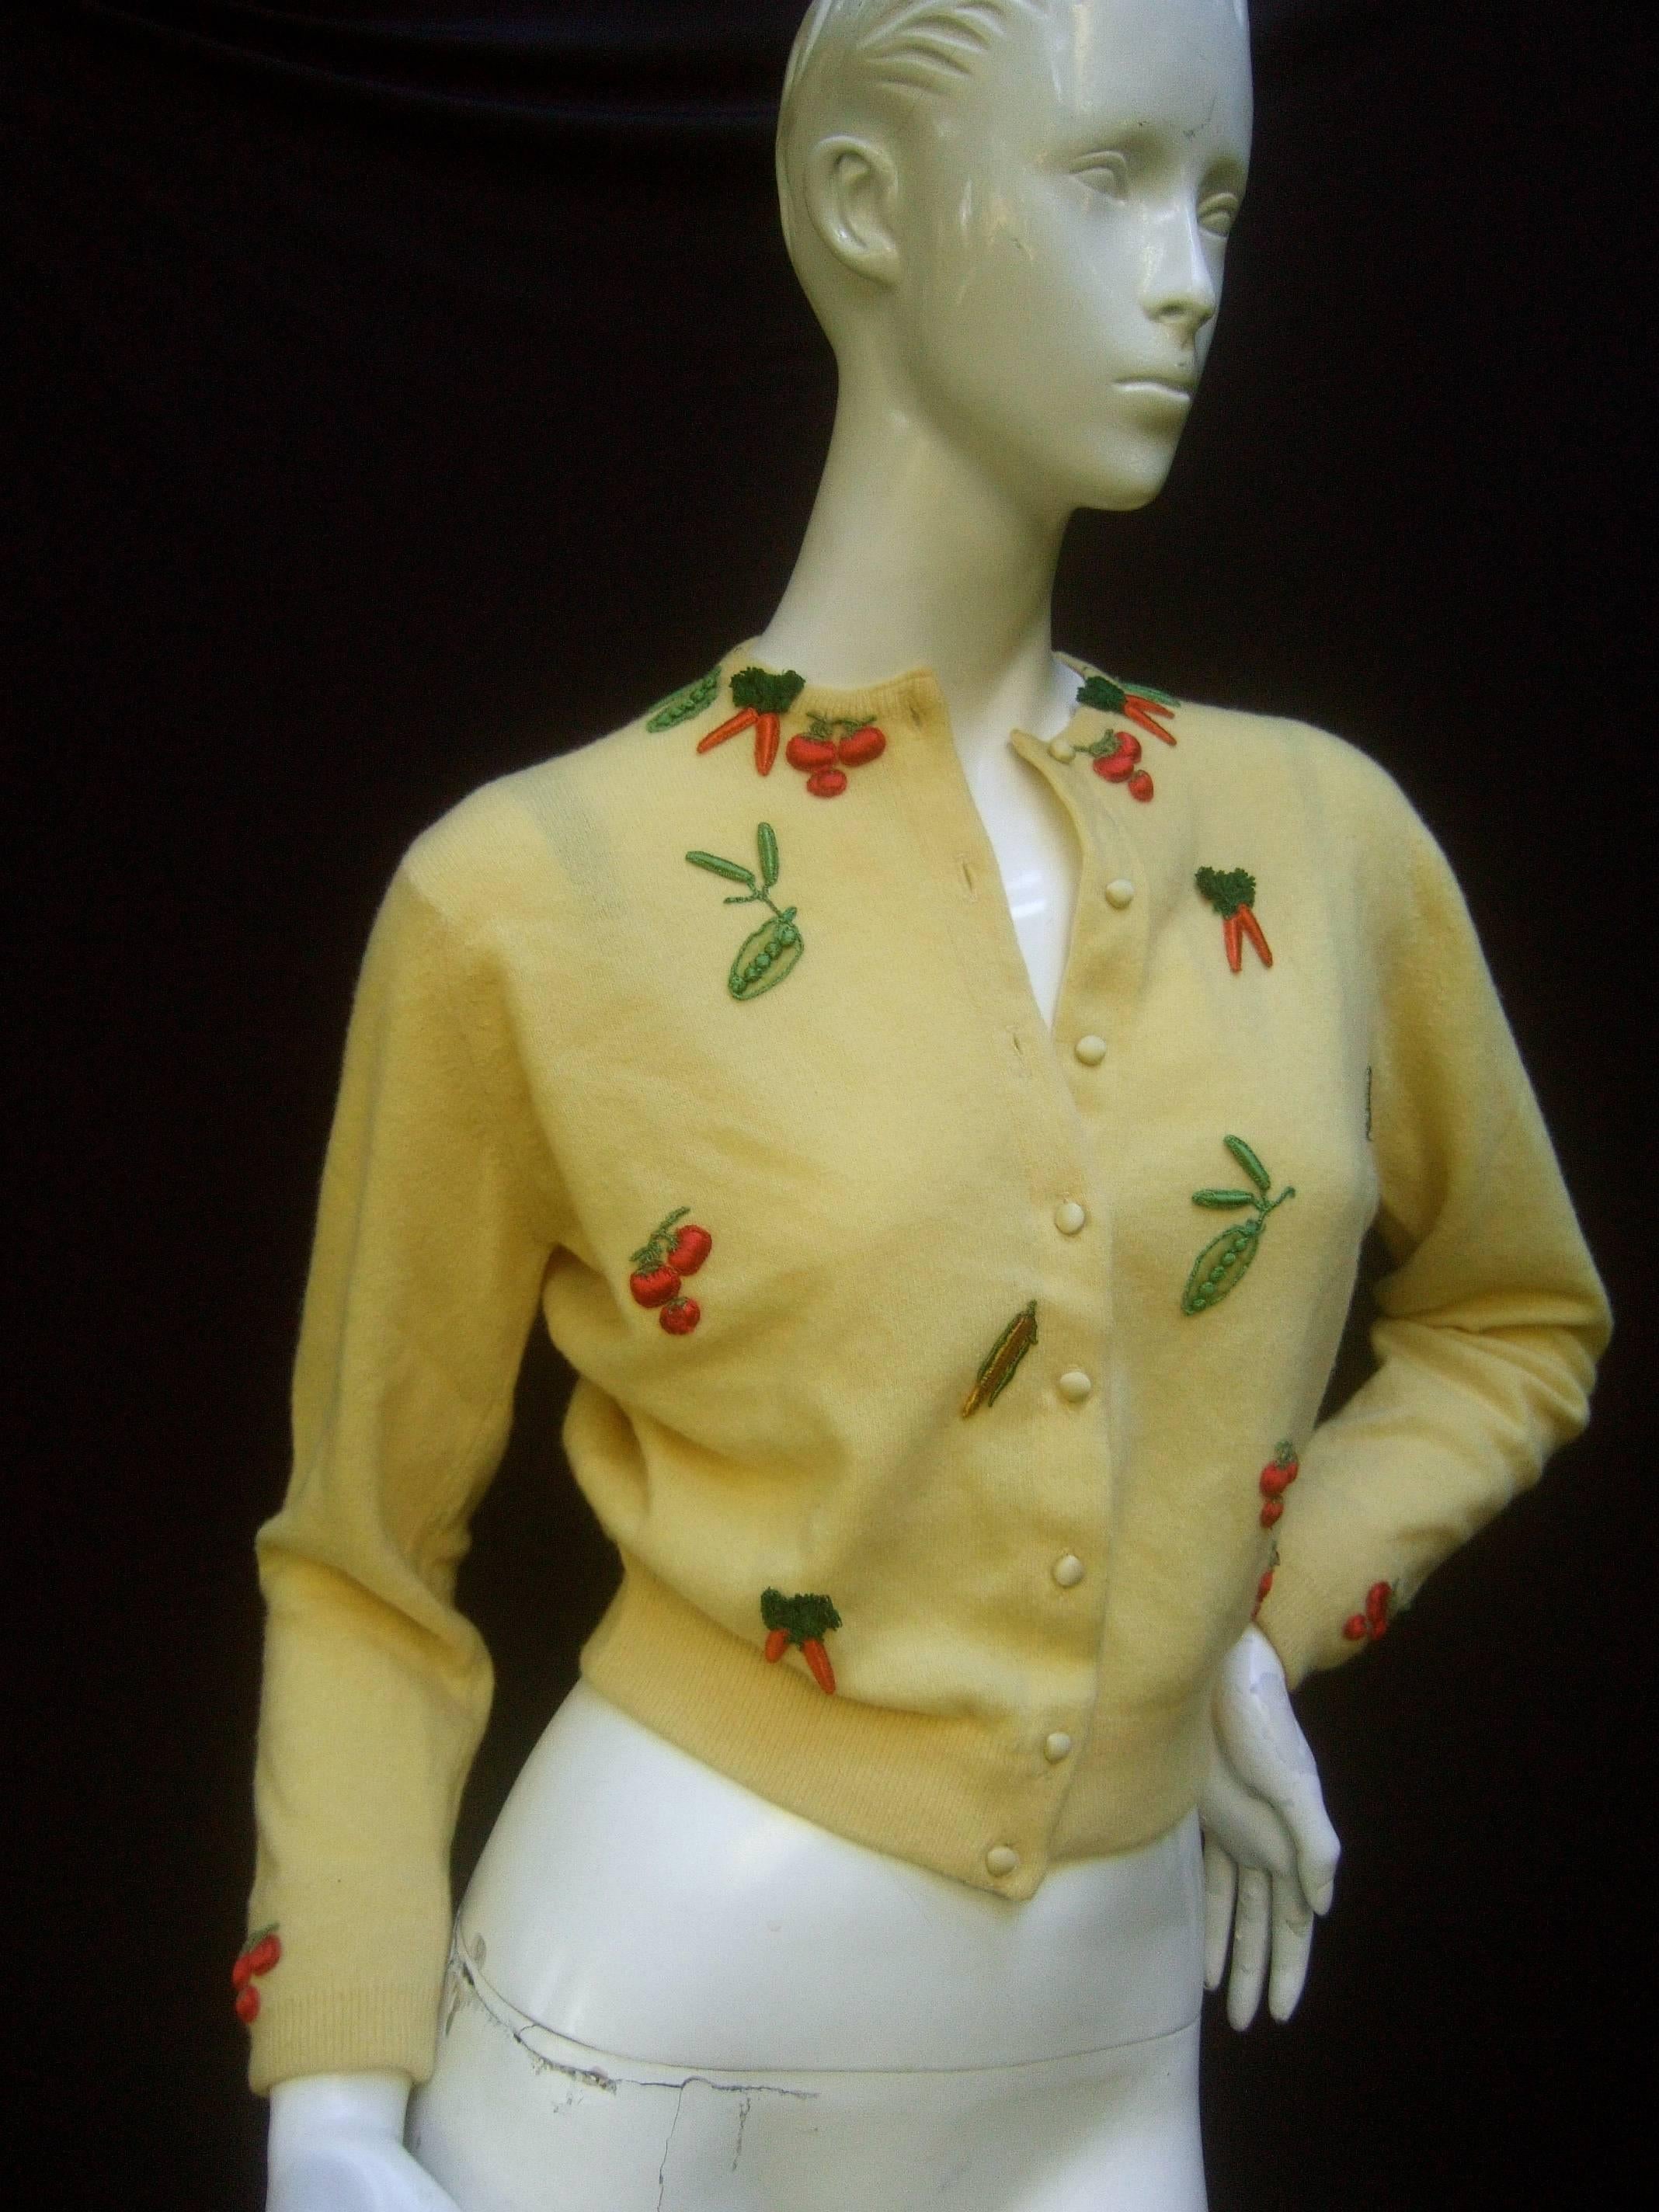 Women's Whimsical Buttercup Yellow Cashmere Vegetable Theme Cardigan by Dalton c 1960 